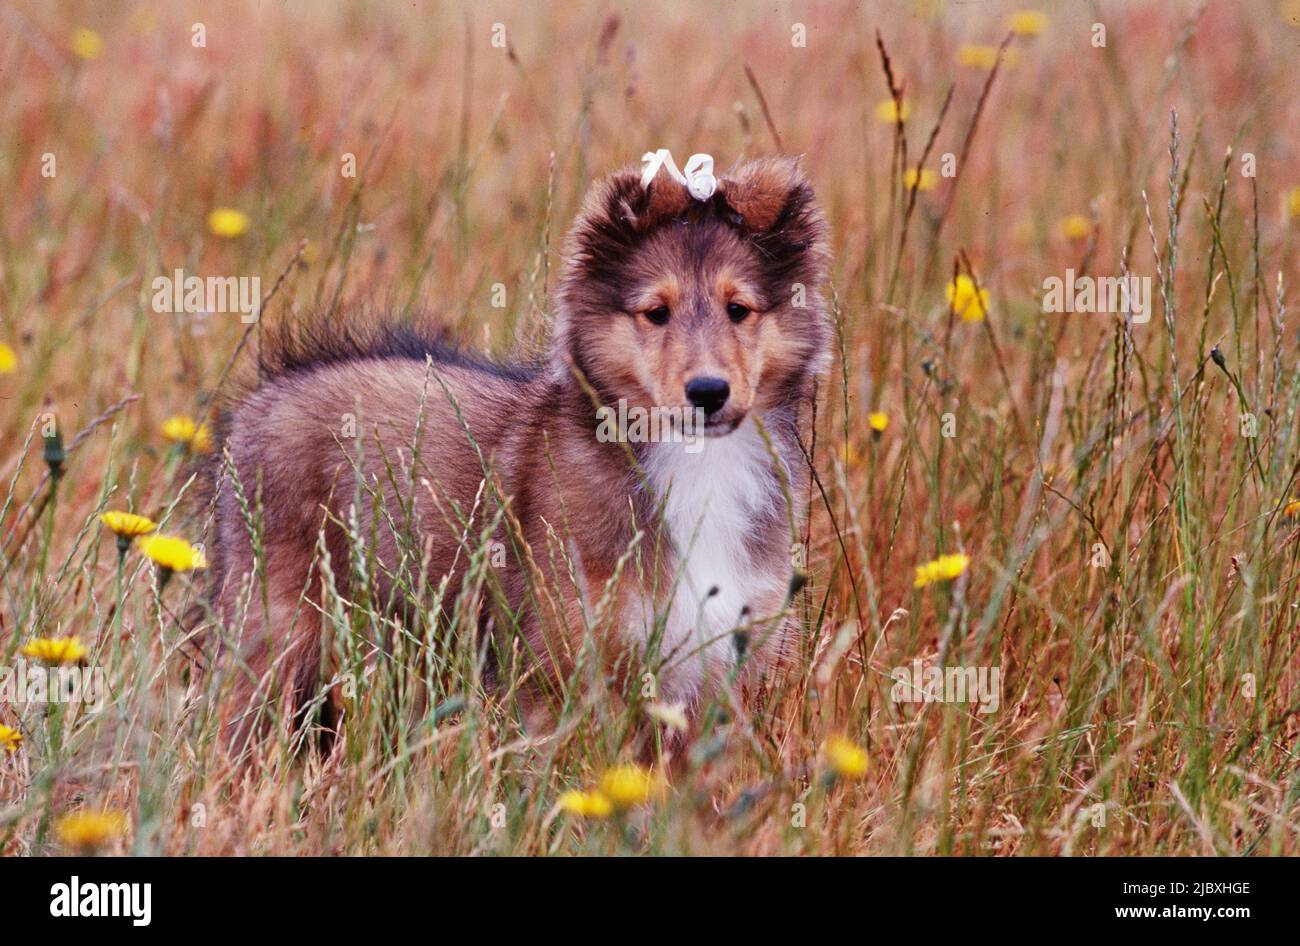 A sheltie puppy dog in a grassy field with wildflowers Stock Photo